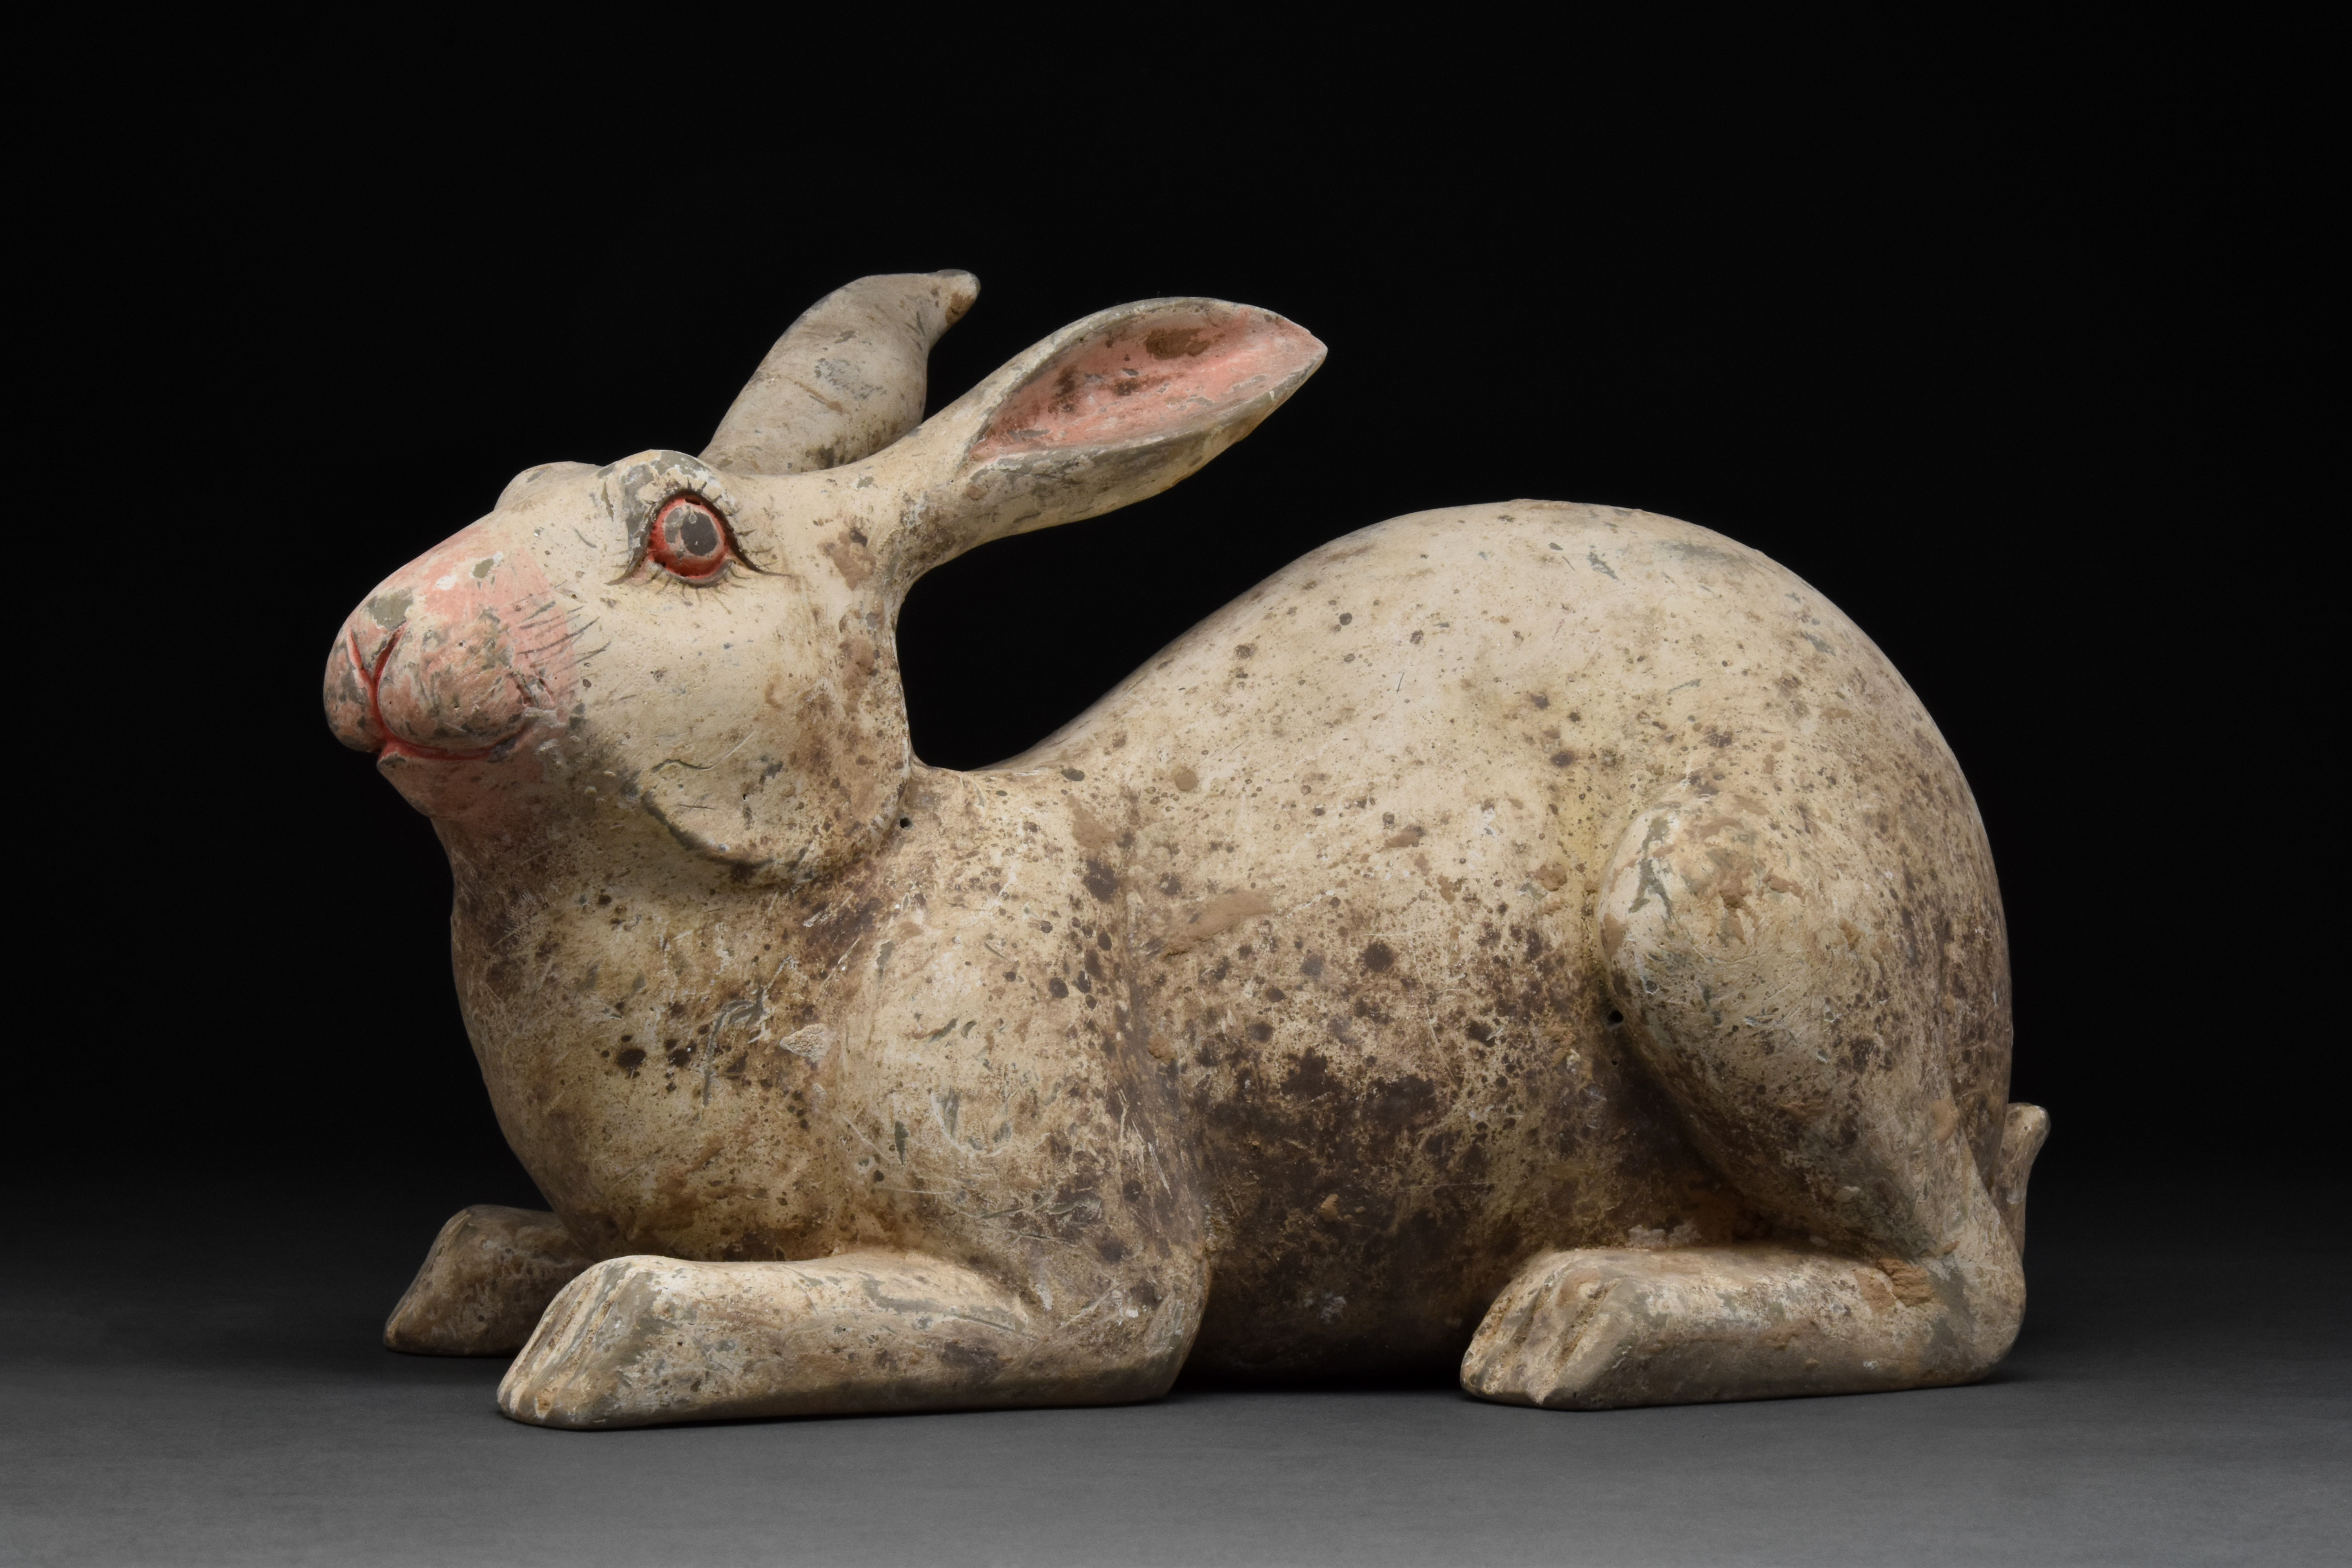 CHINESE TERRACOTTA HAN RABBIT - TL TESTED